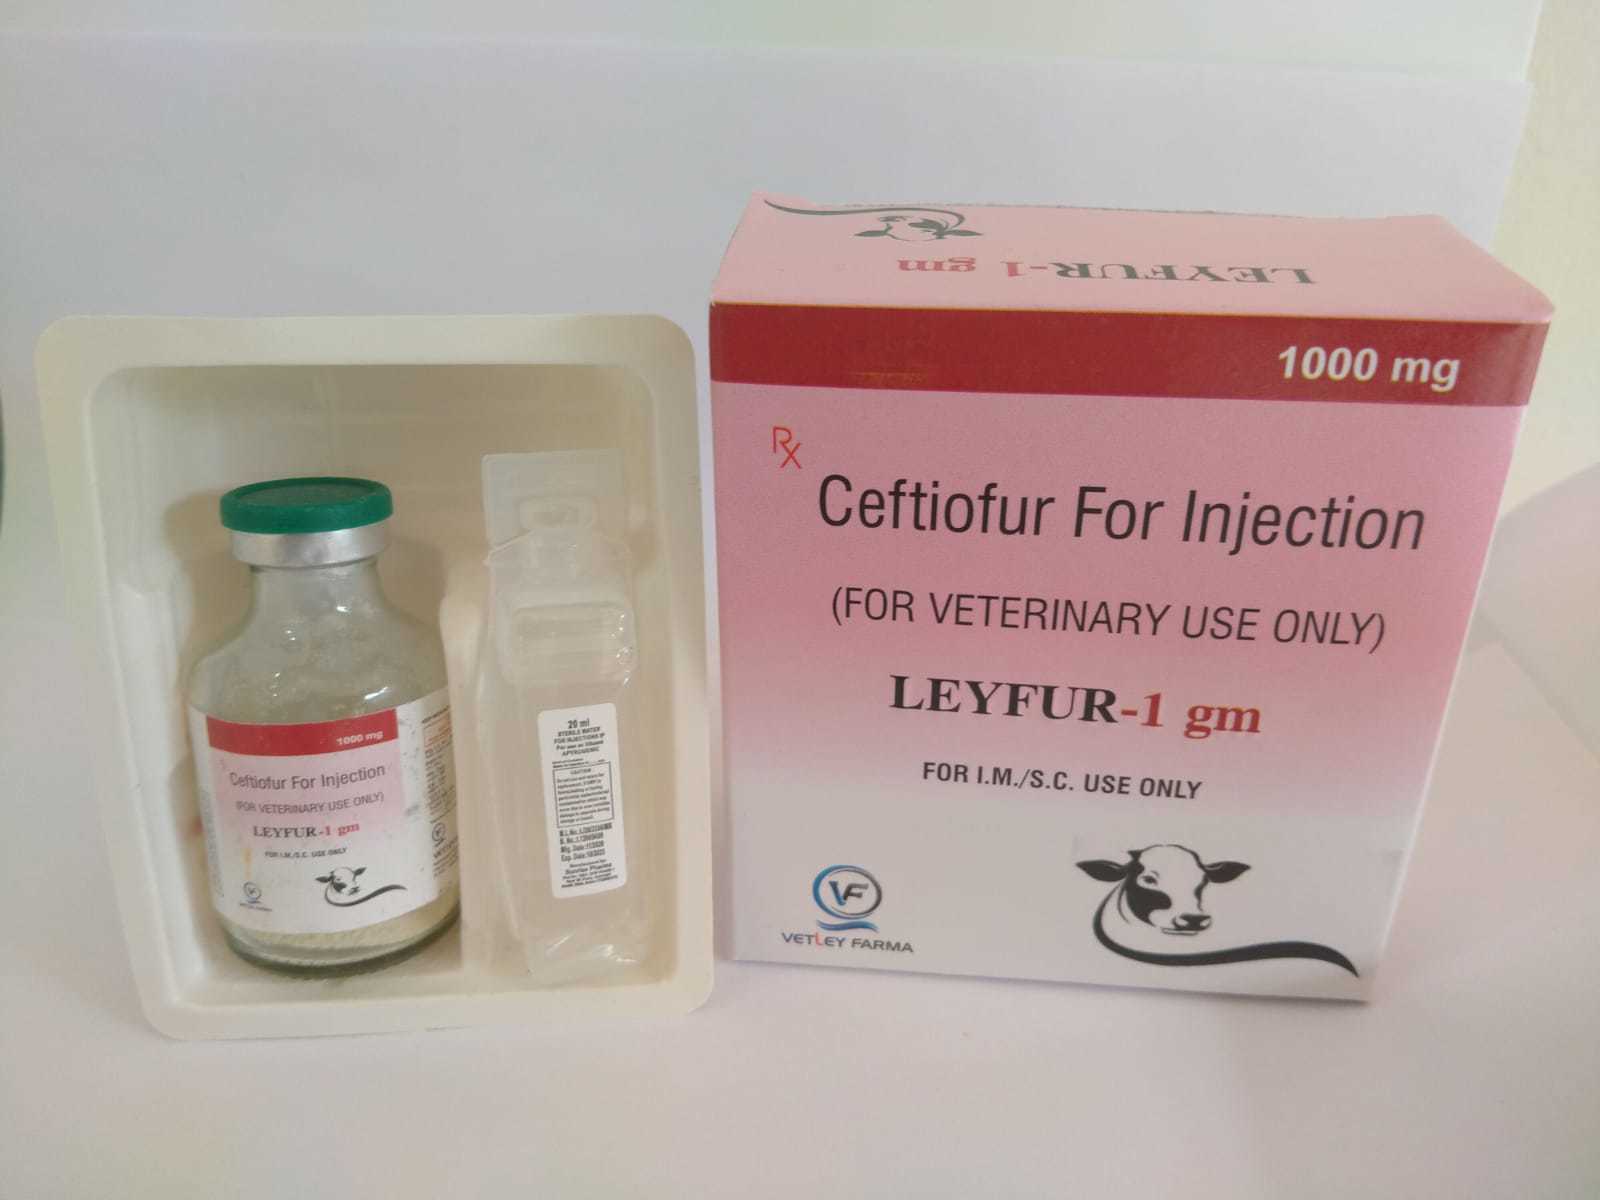 Ceftiofur Injection For Veterinary Pcd pharma franchise only